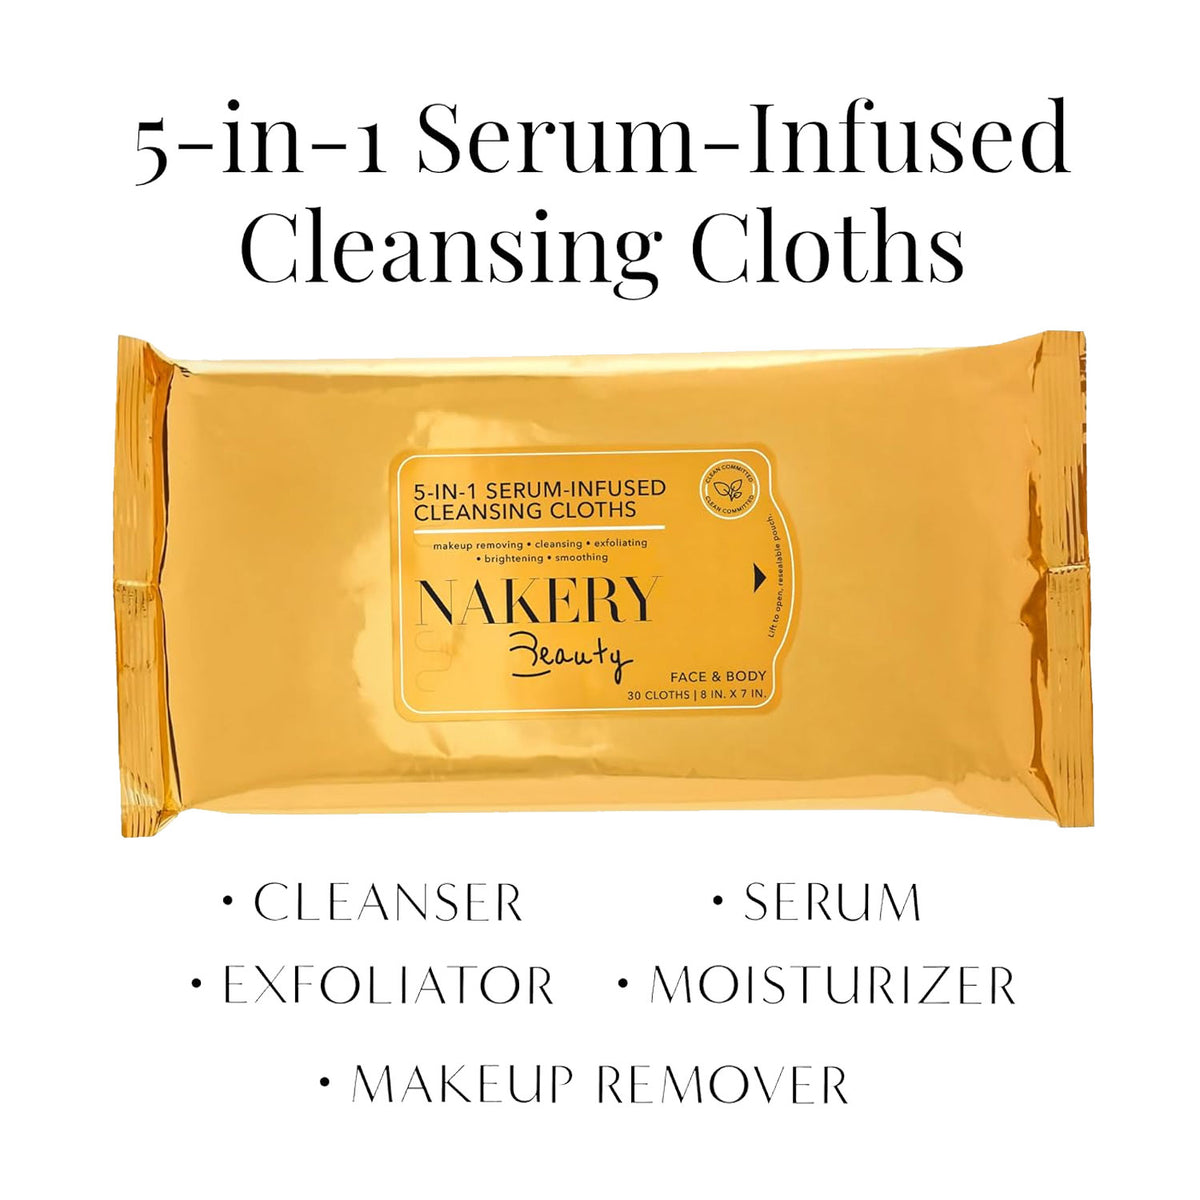 5-in-1 Serum-Infused Cleansing Cloths